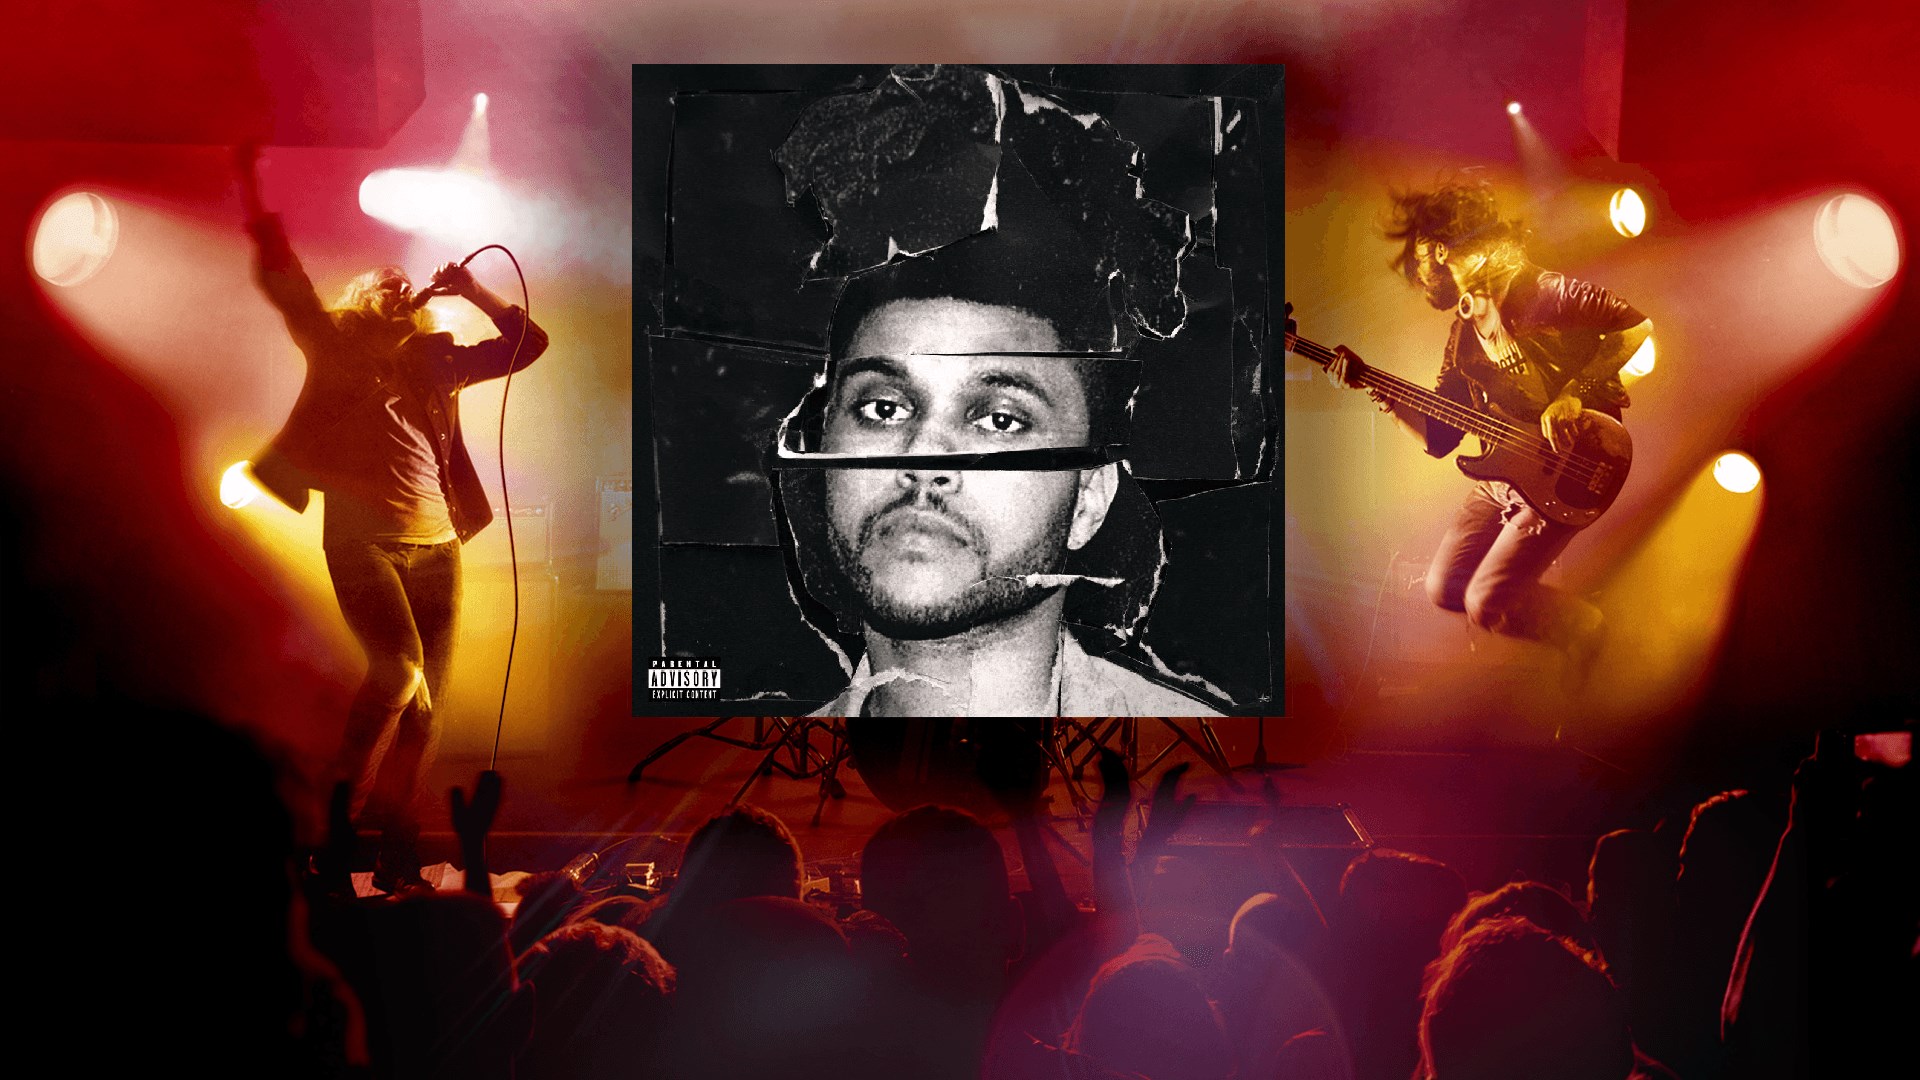 Buy "The Hills" - The Weeknd - Microsoft Store